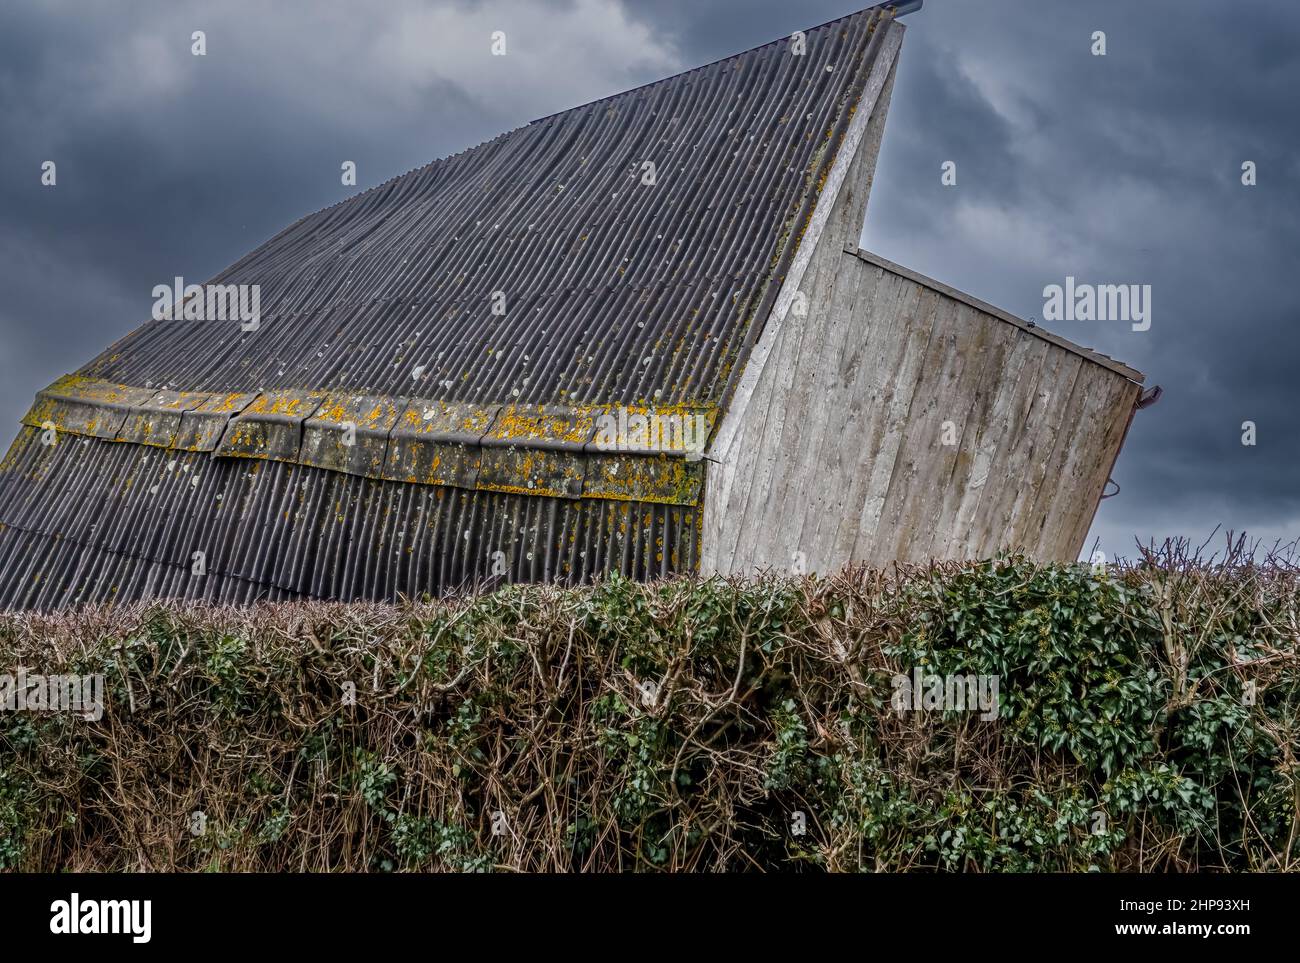 wooden horse stables blown over on to its side strong winds of a storm, thunder storm dark cloud sky Stock Photo